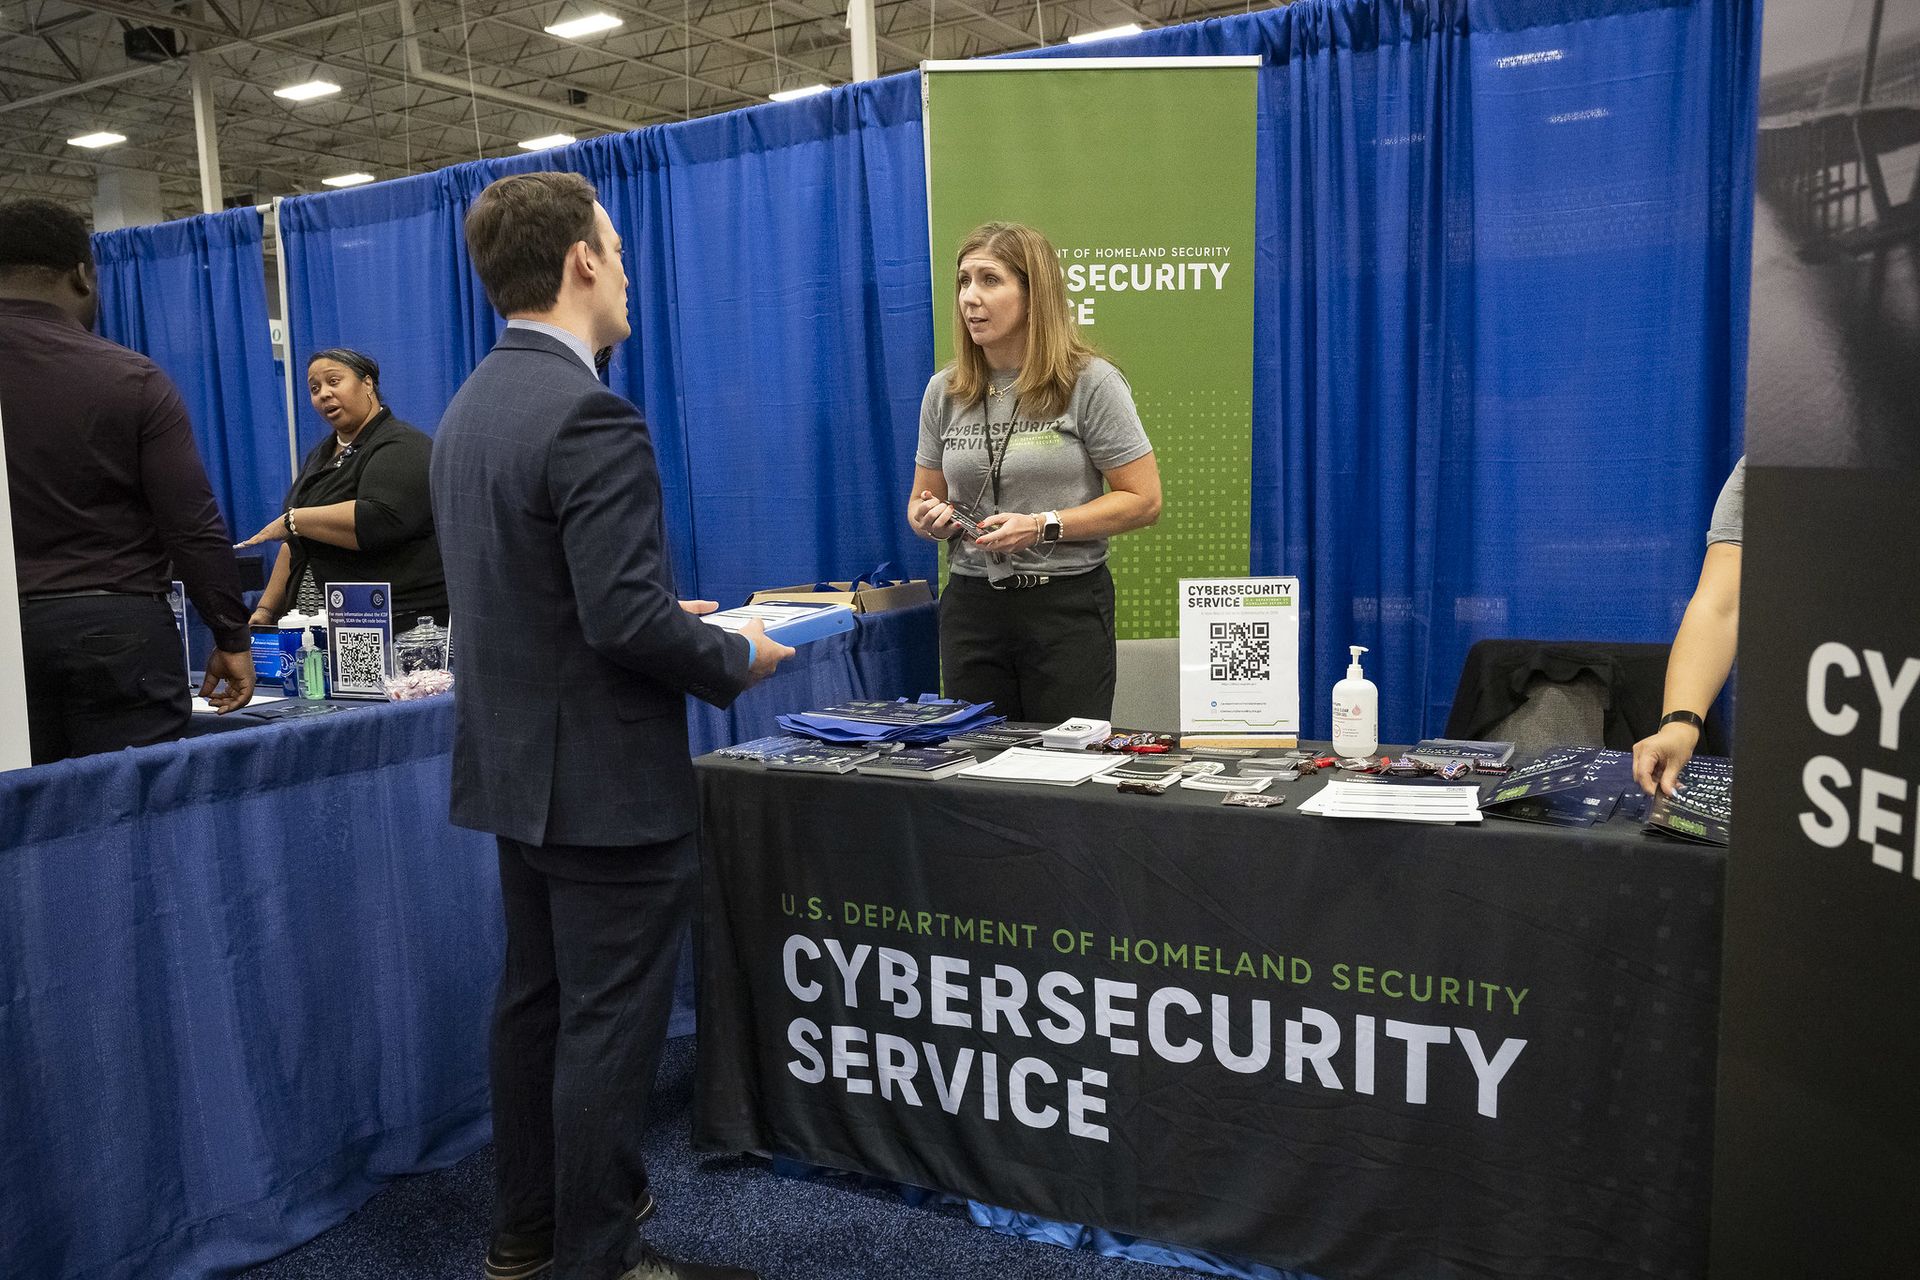 CISA career expo booth